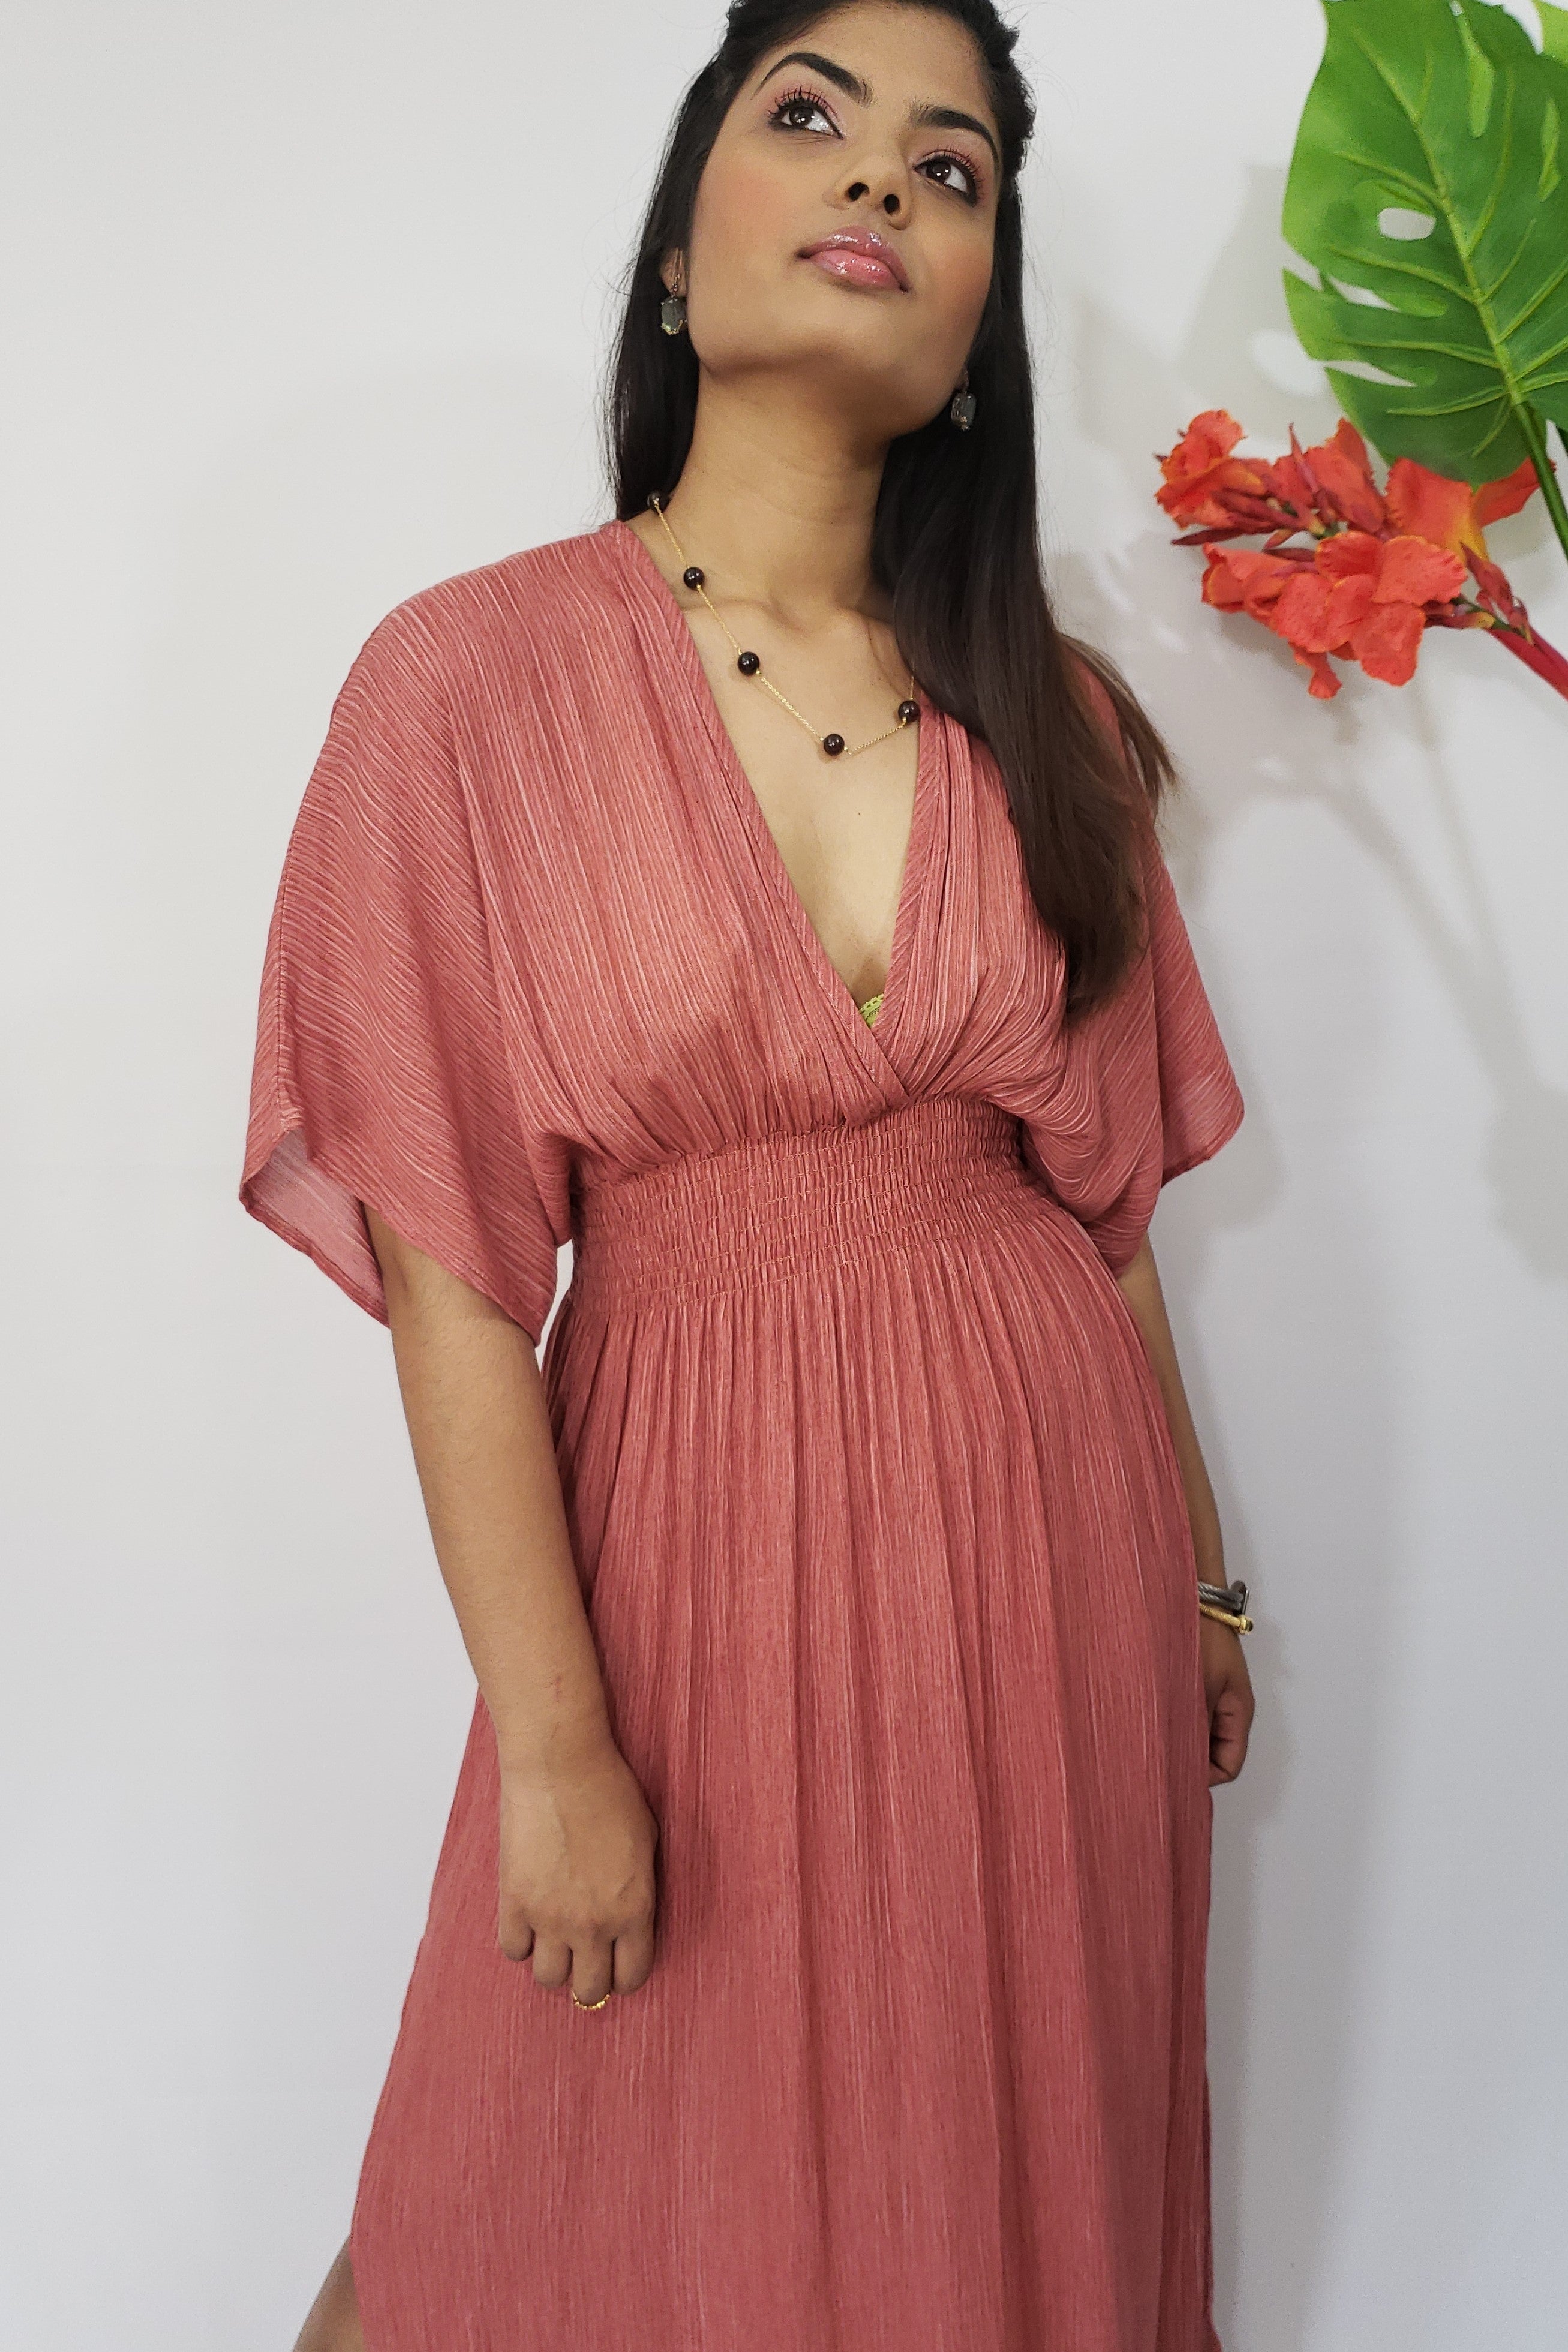 Uh Huh Honey Plunged V Neckline Maxi in Rust - Houzz of DVA Boutique